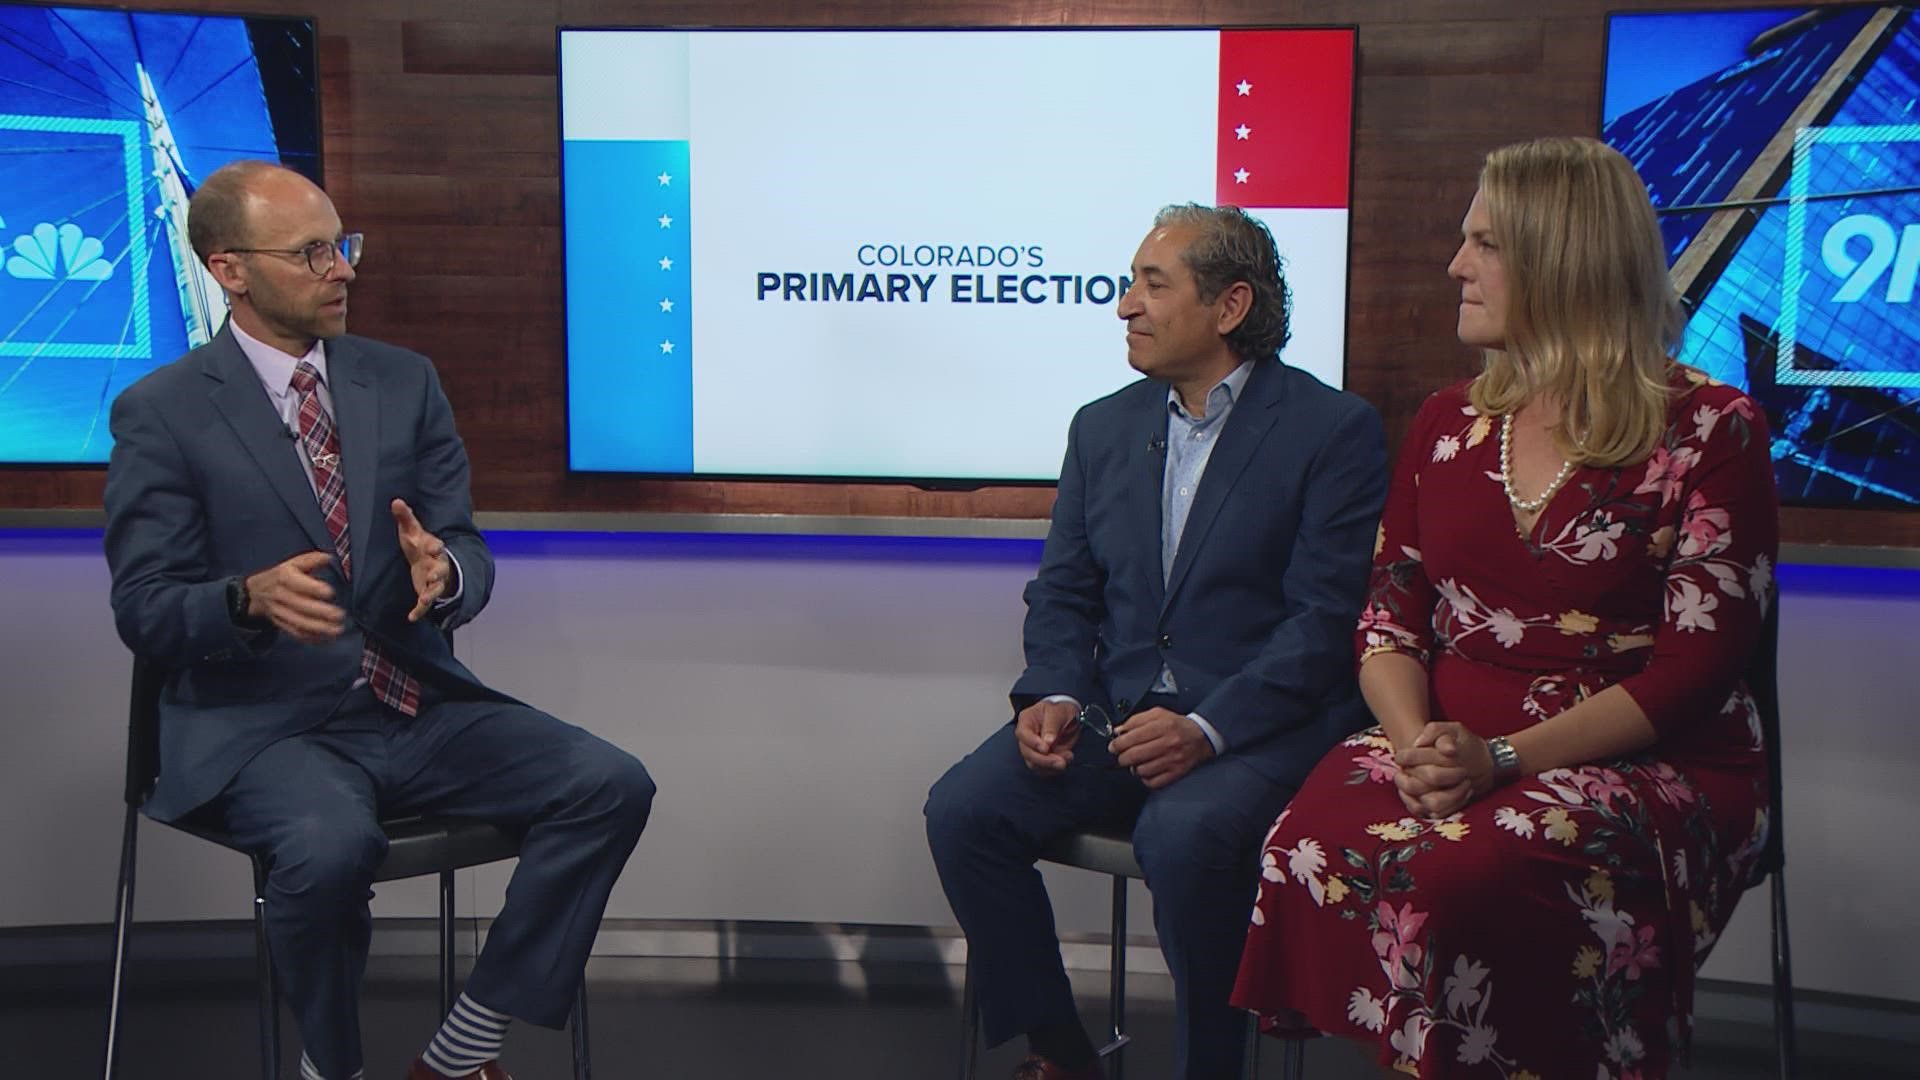 9NEWS political experts Kelly Maher and James Mejia discuss Tuesday's primary results.